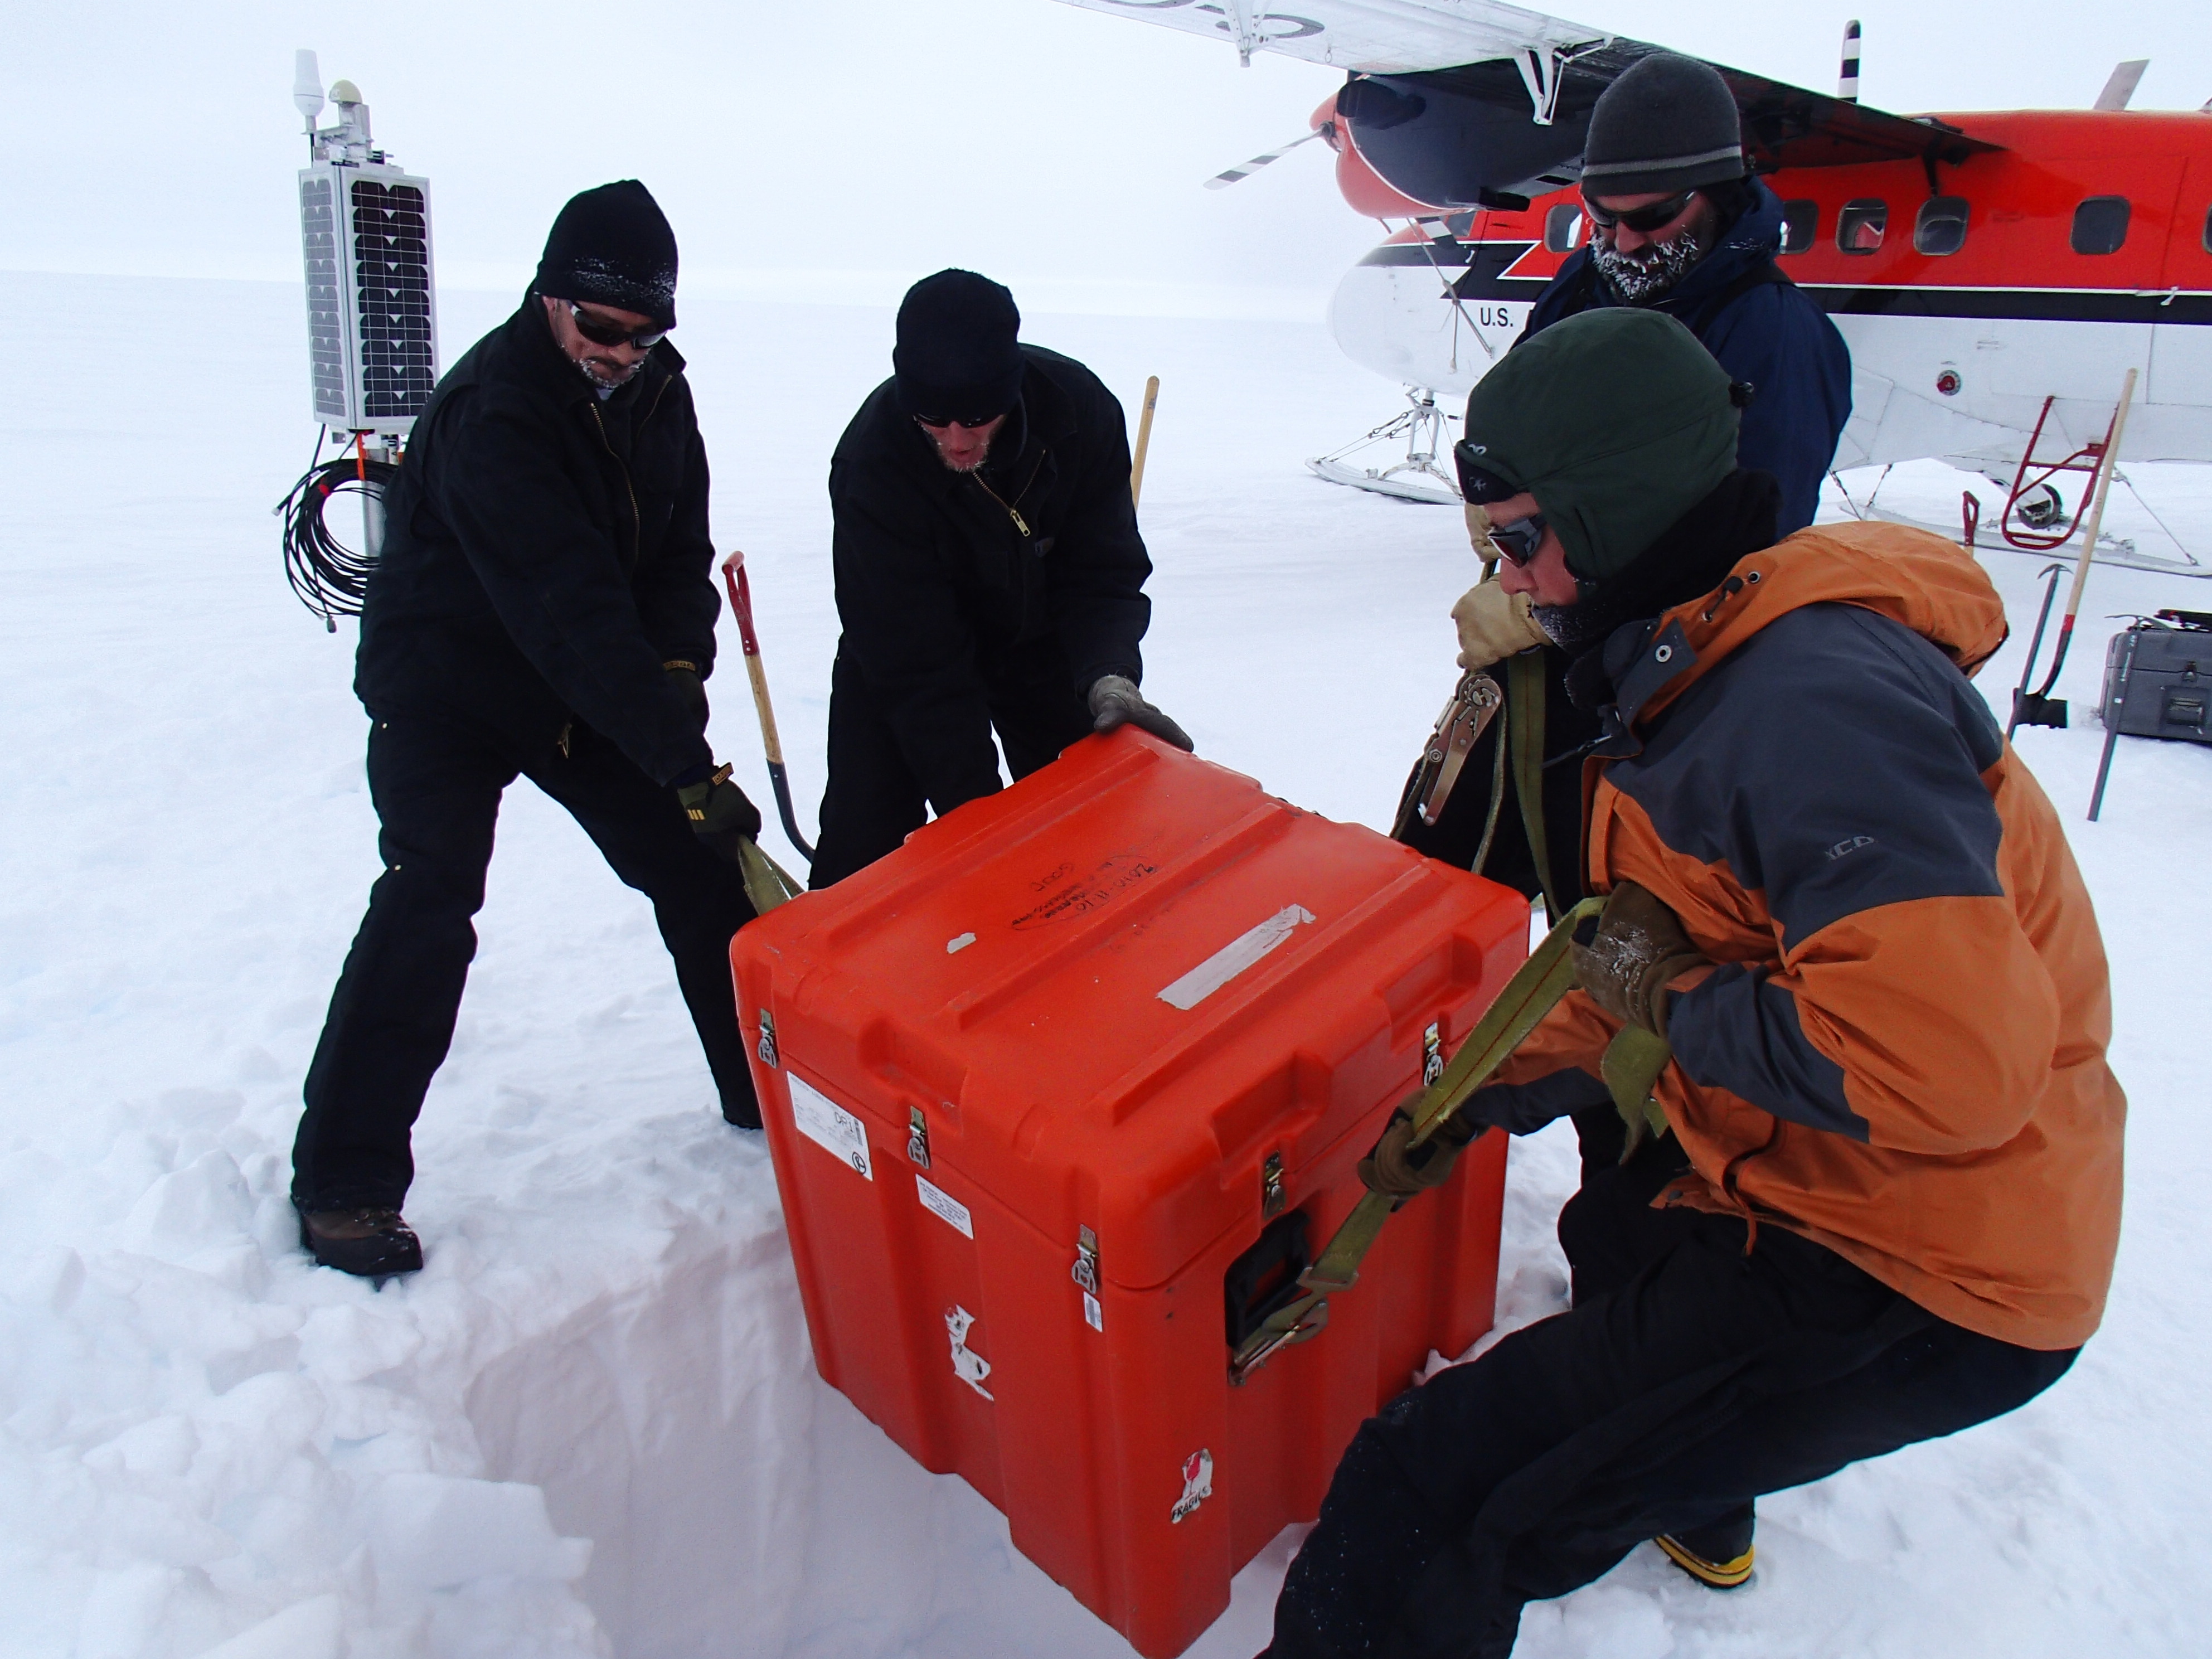 Four researchers handling equipment in the snow